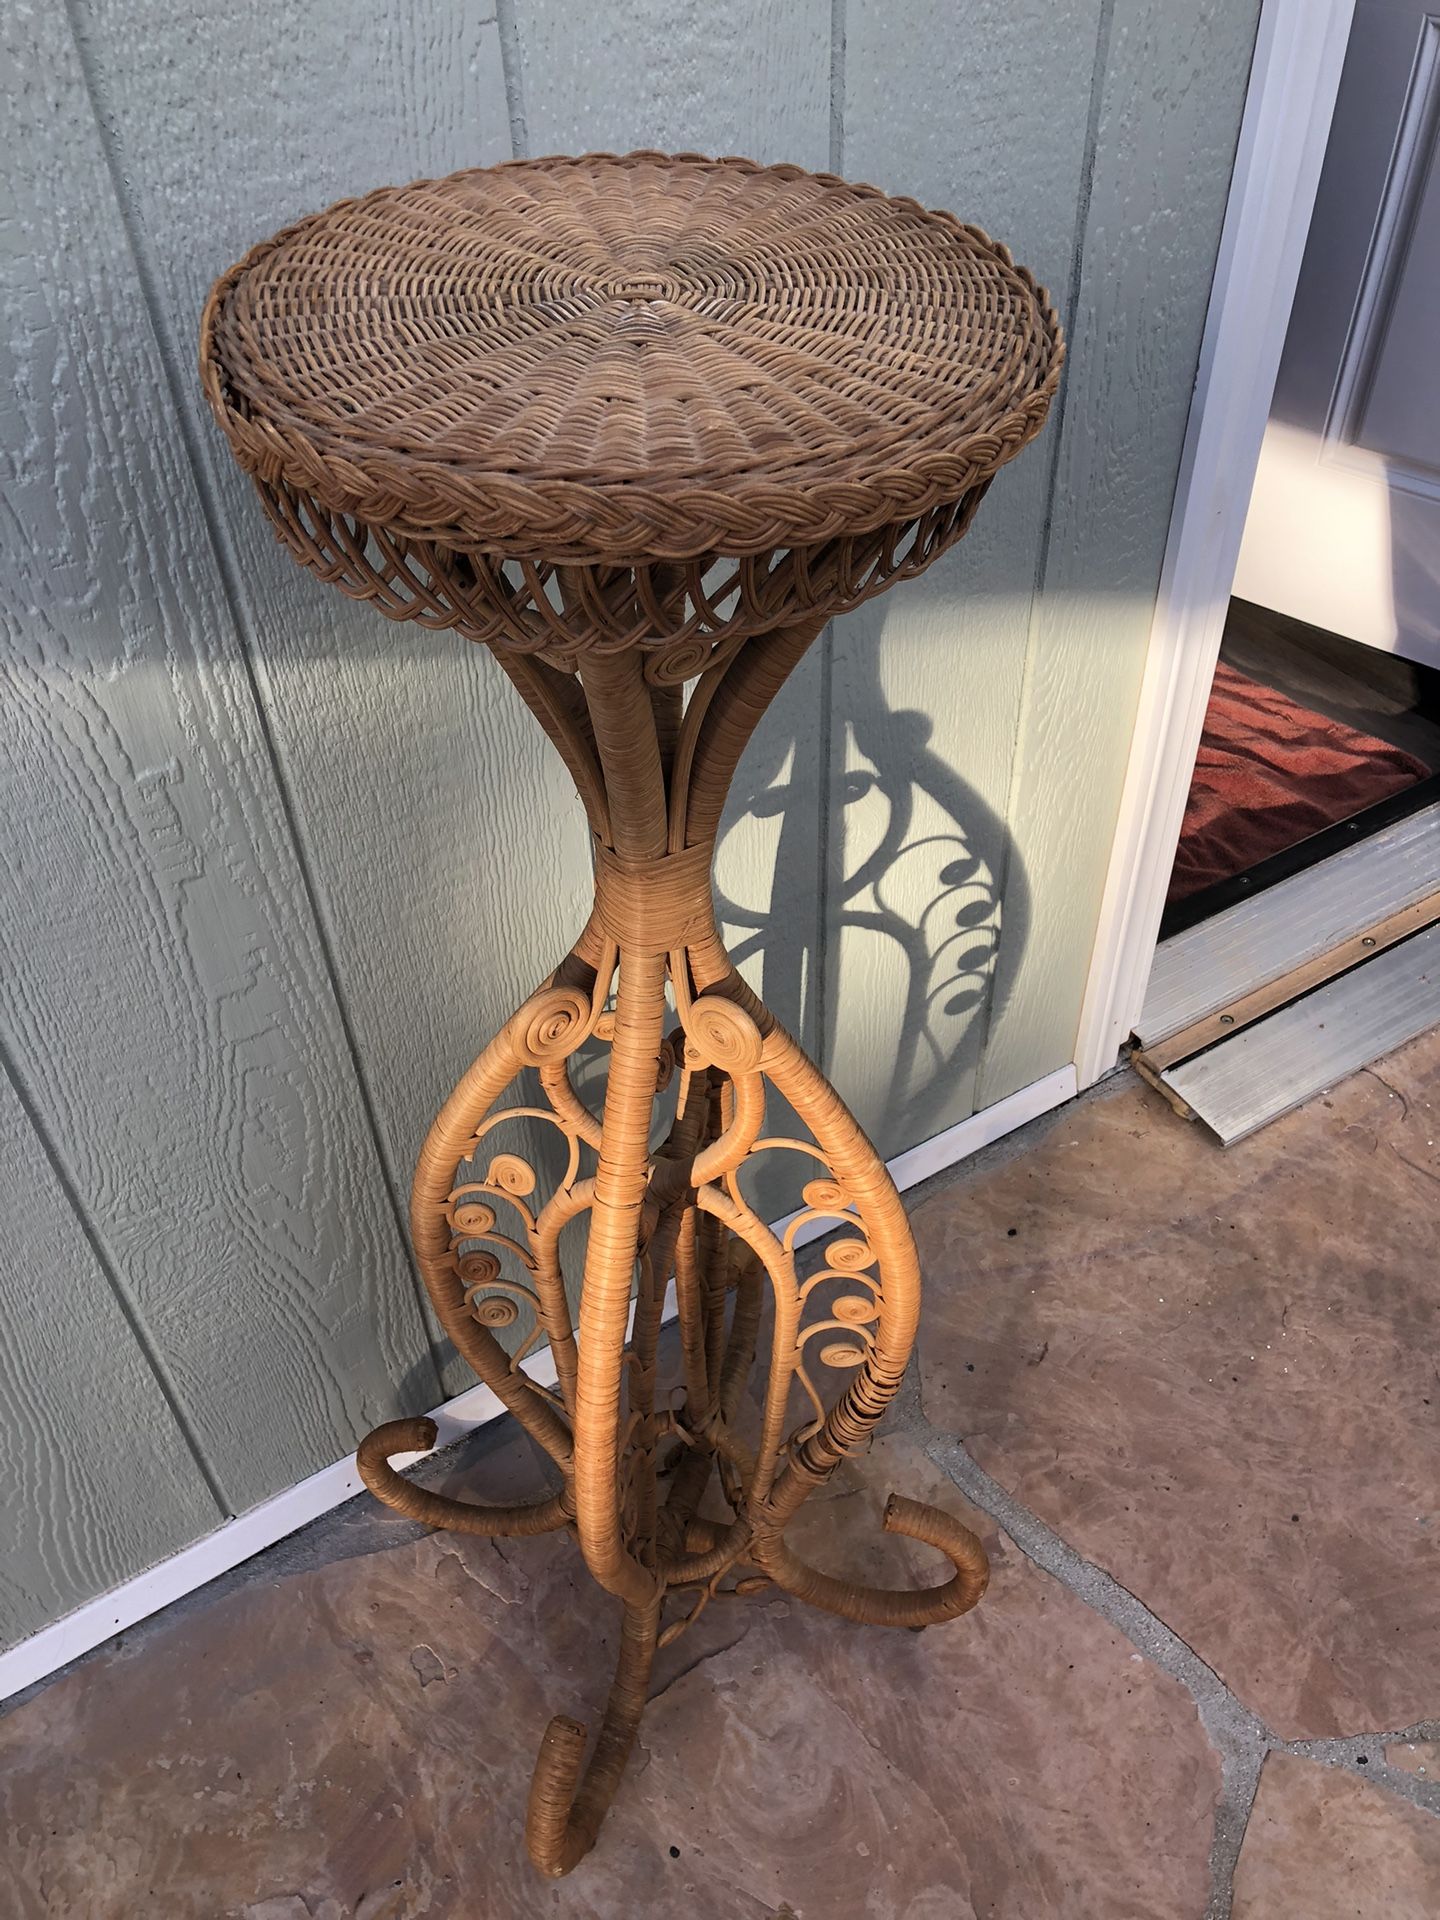 Beautiful Vintage Wicker Rattan Bamboo Plant Stand Victorian Scroll Weave Intricate Tall Stand 